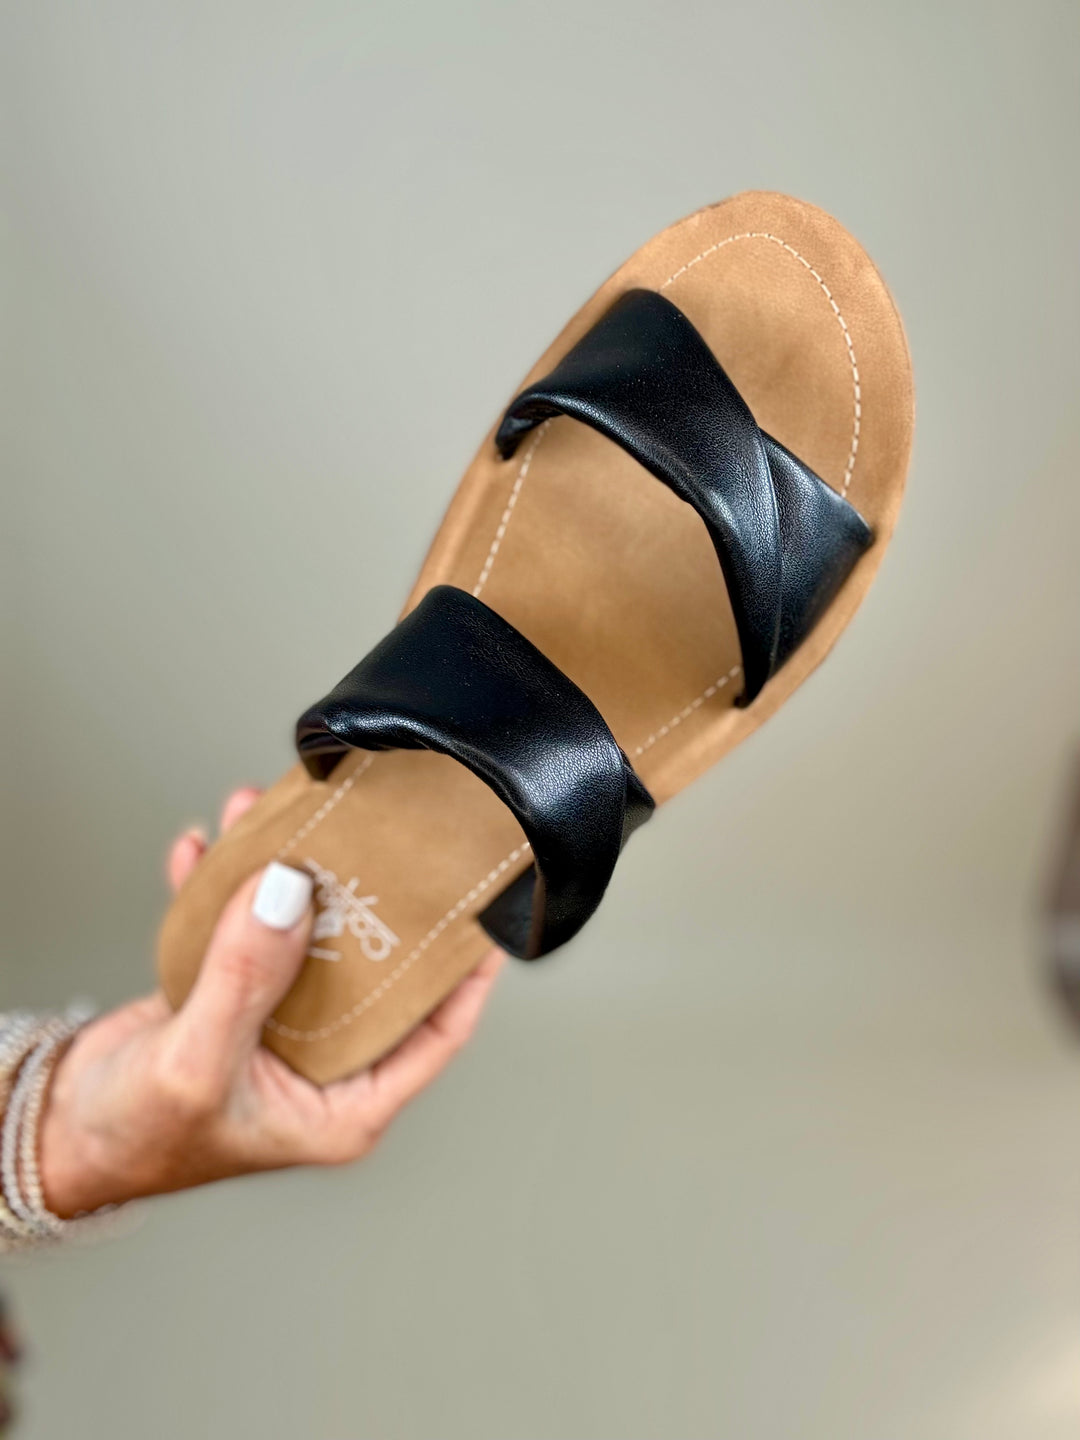 Double Strap with a Twist Sandal - 6 Color Options